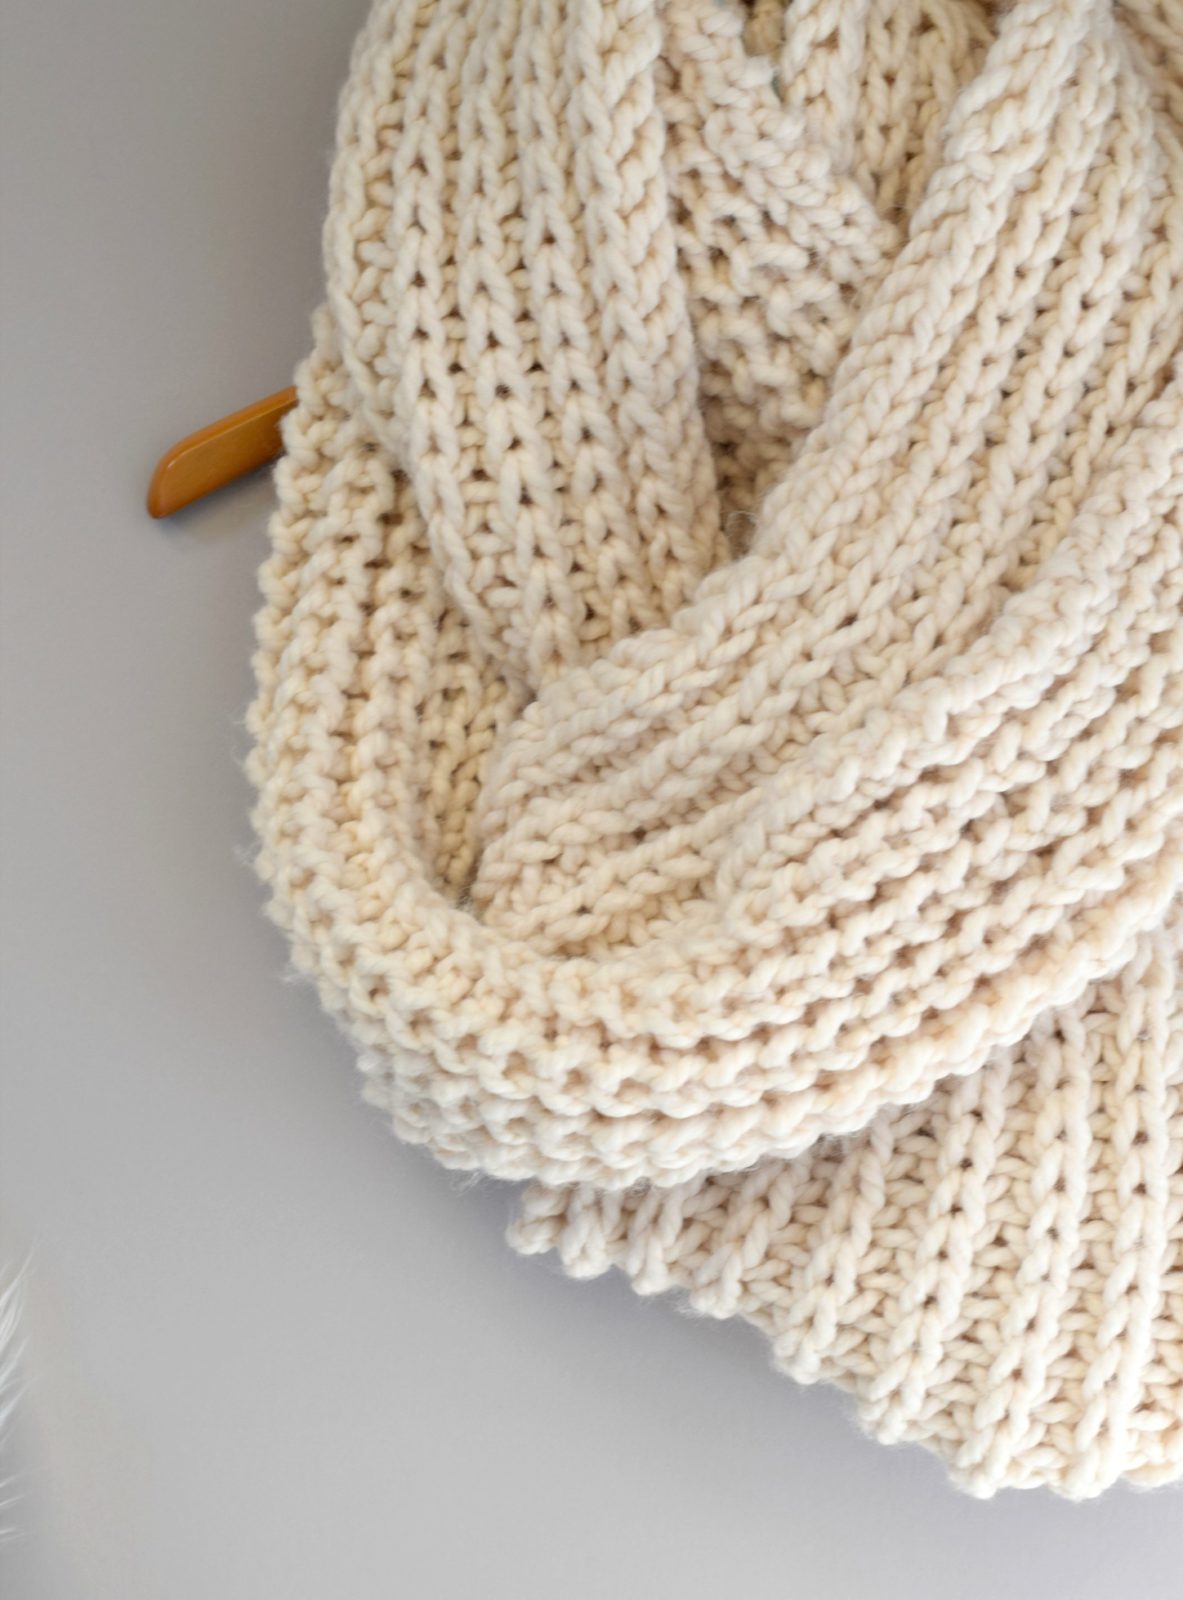 How to knit a scarf step by step